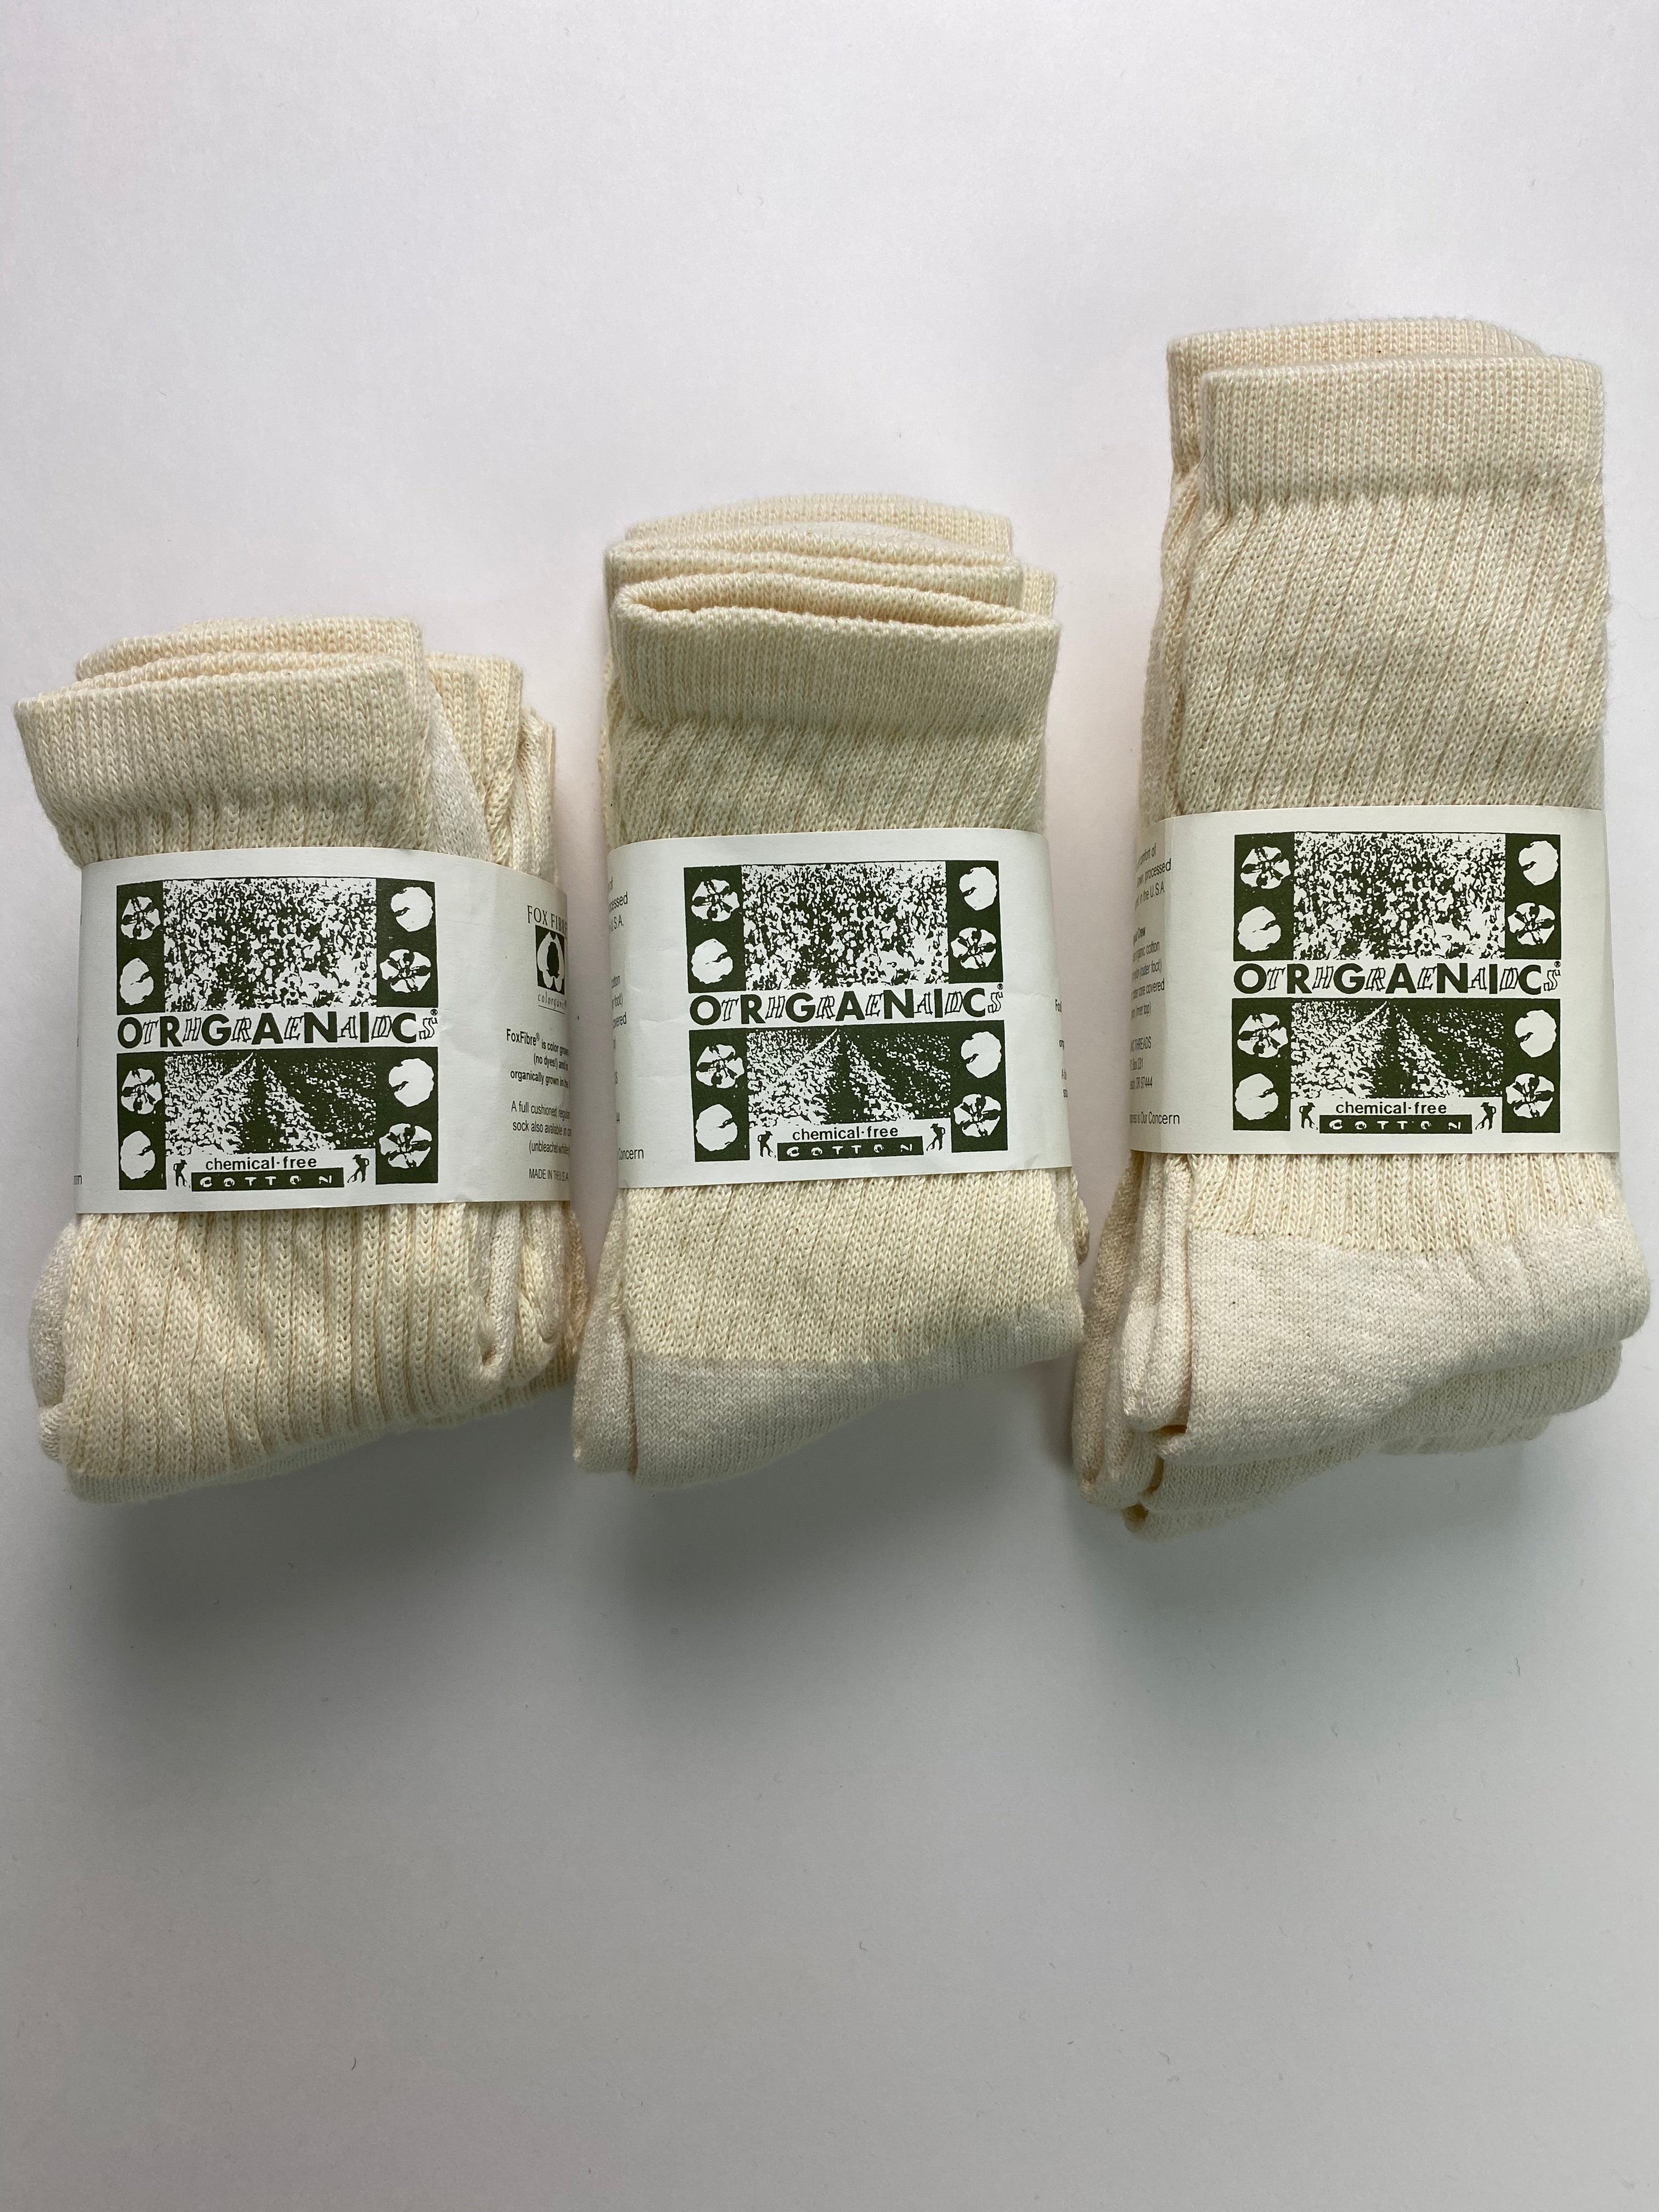 U.S. military thermal cotton socks – Latre art and style